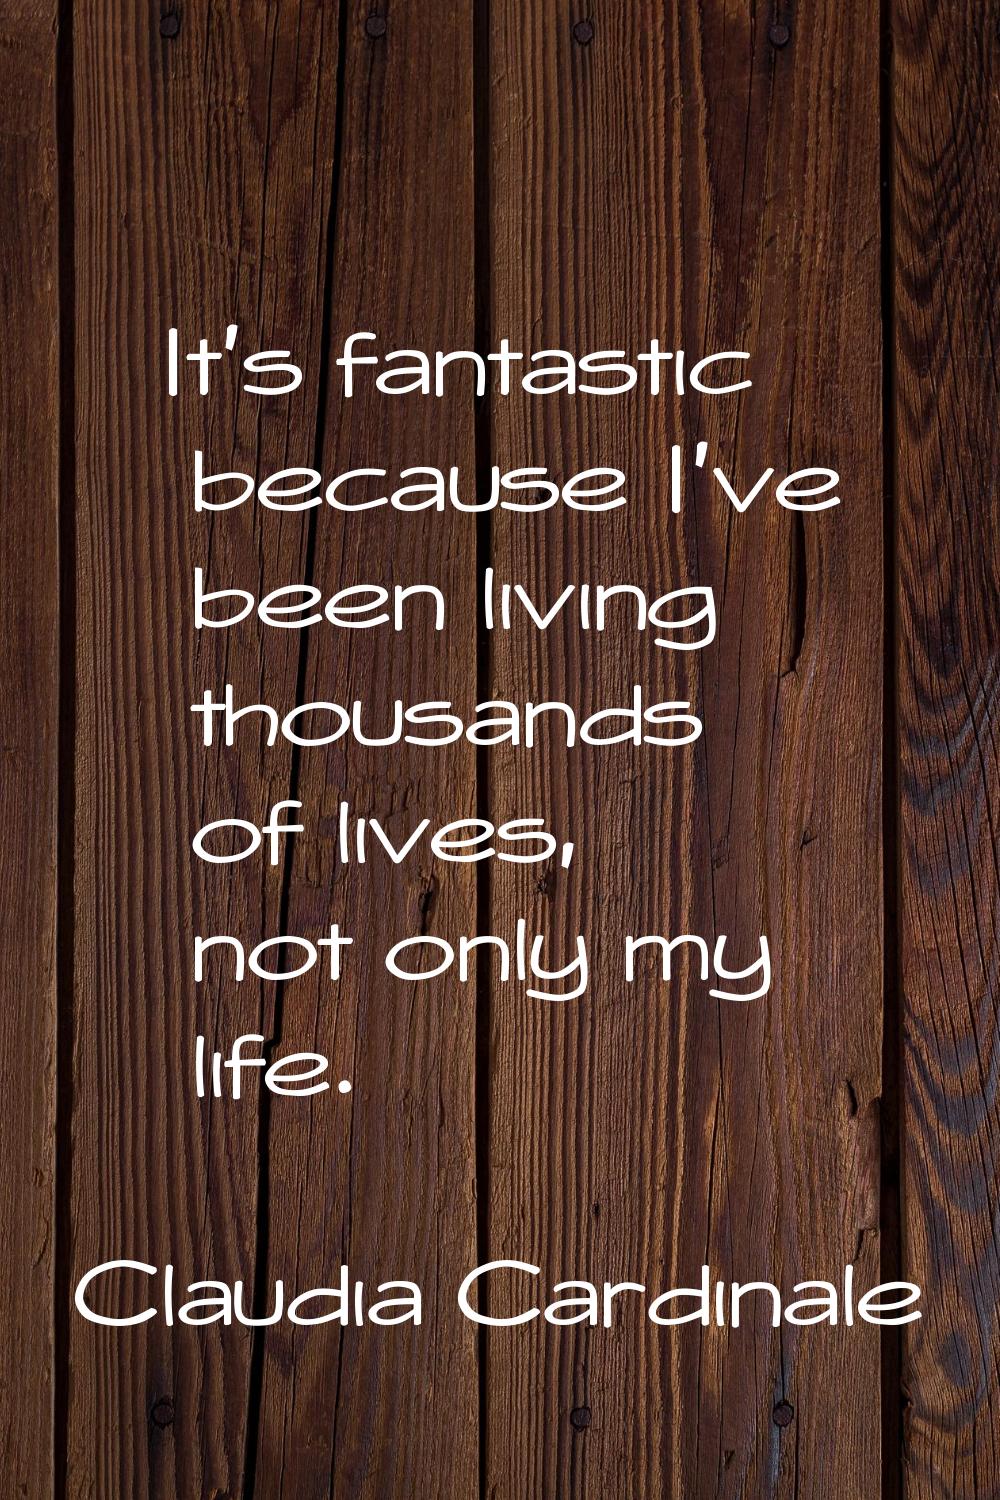 It's fantastic because I've been living thousands of lives, not only my life.